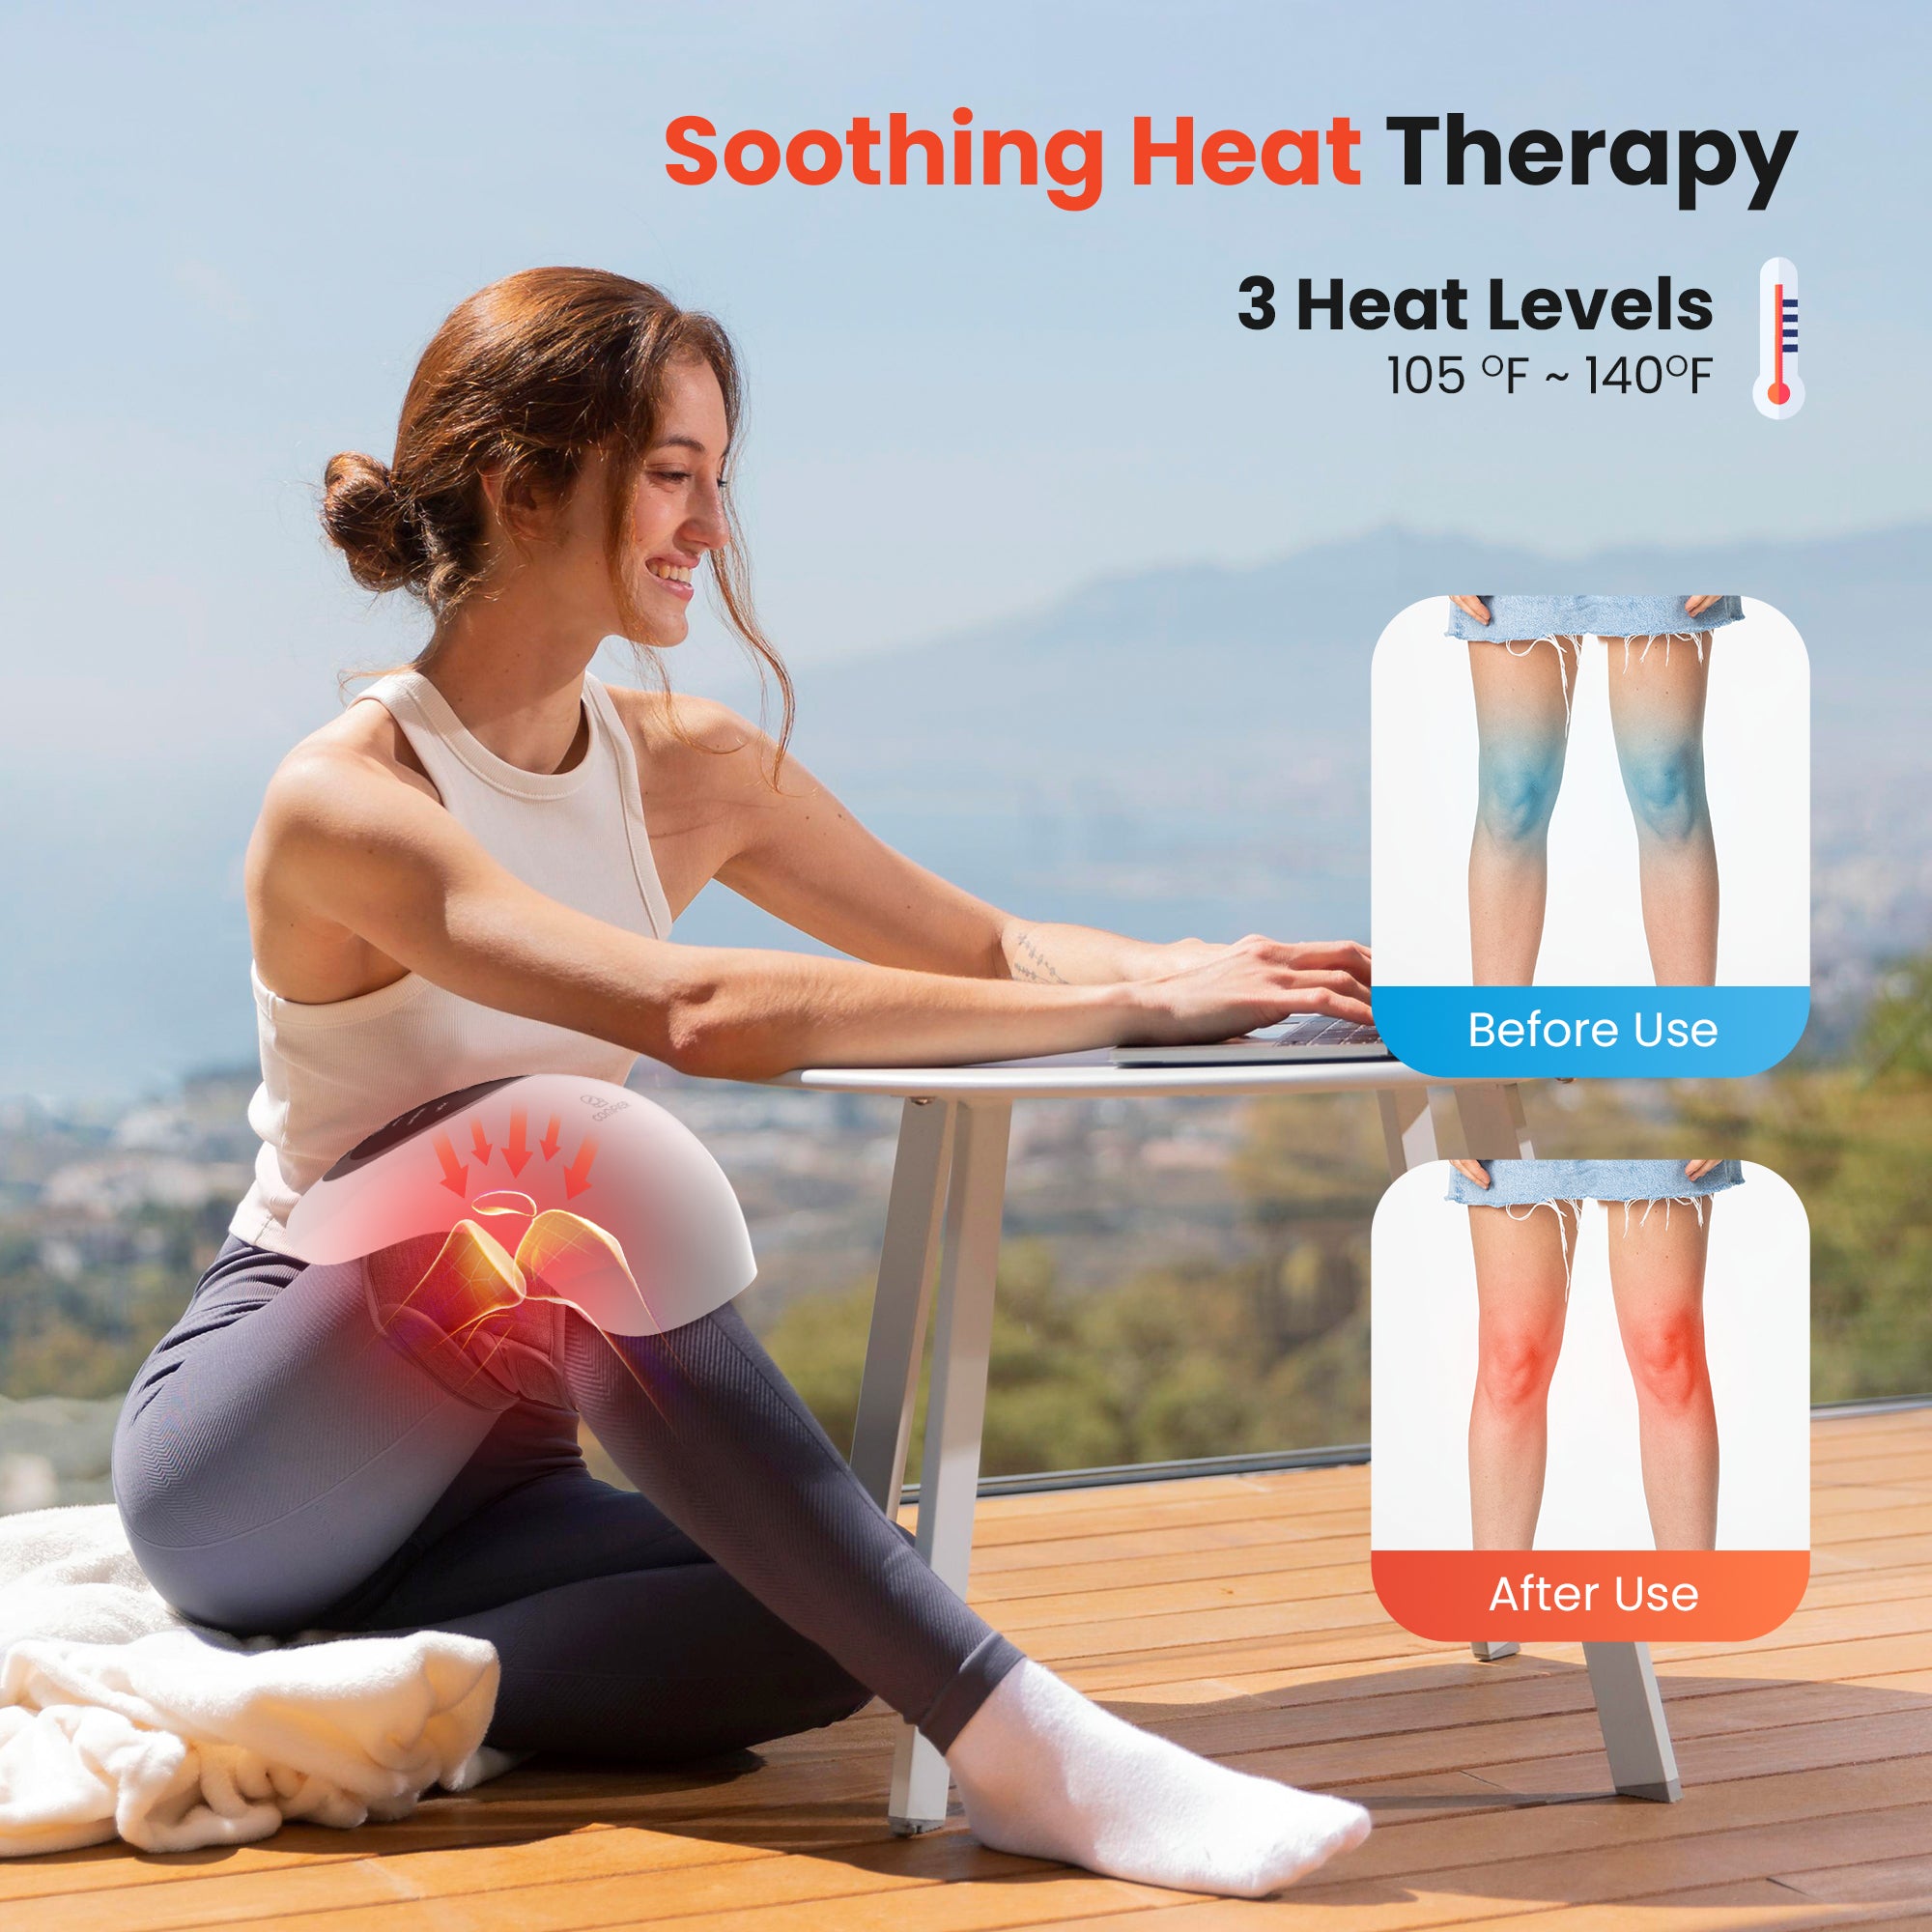 COMFIER Cordless Knee Massager with Heat and Red Light Therapy, Vibration Rechargeable Knee Support for knee Pain with LED Screen CF-5320